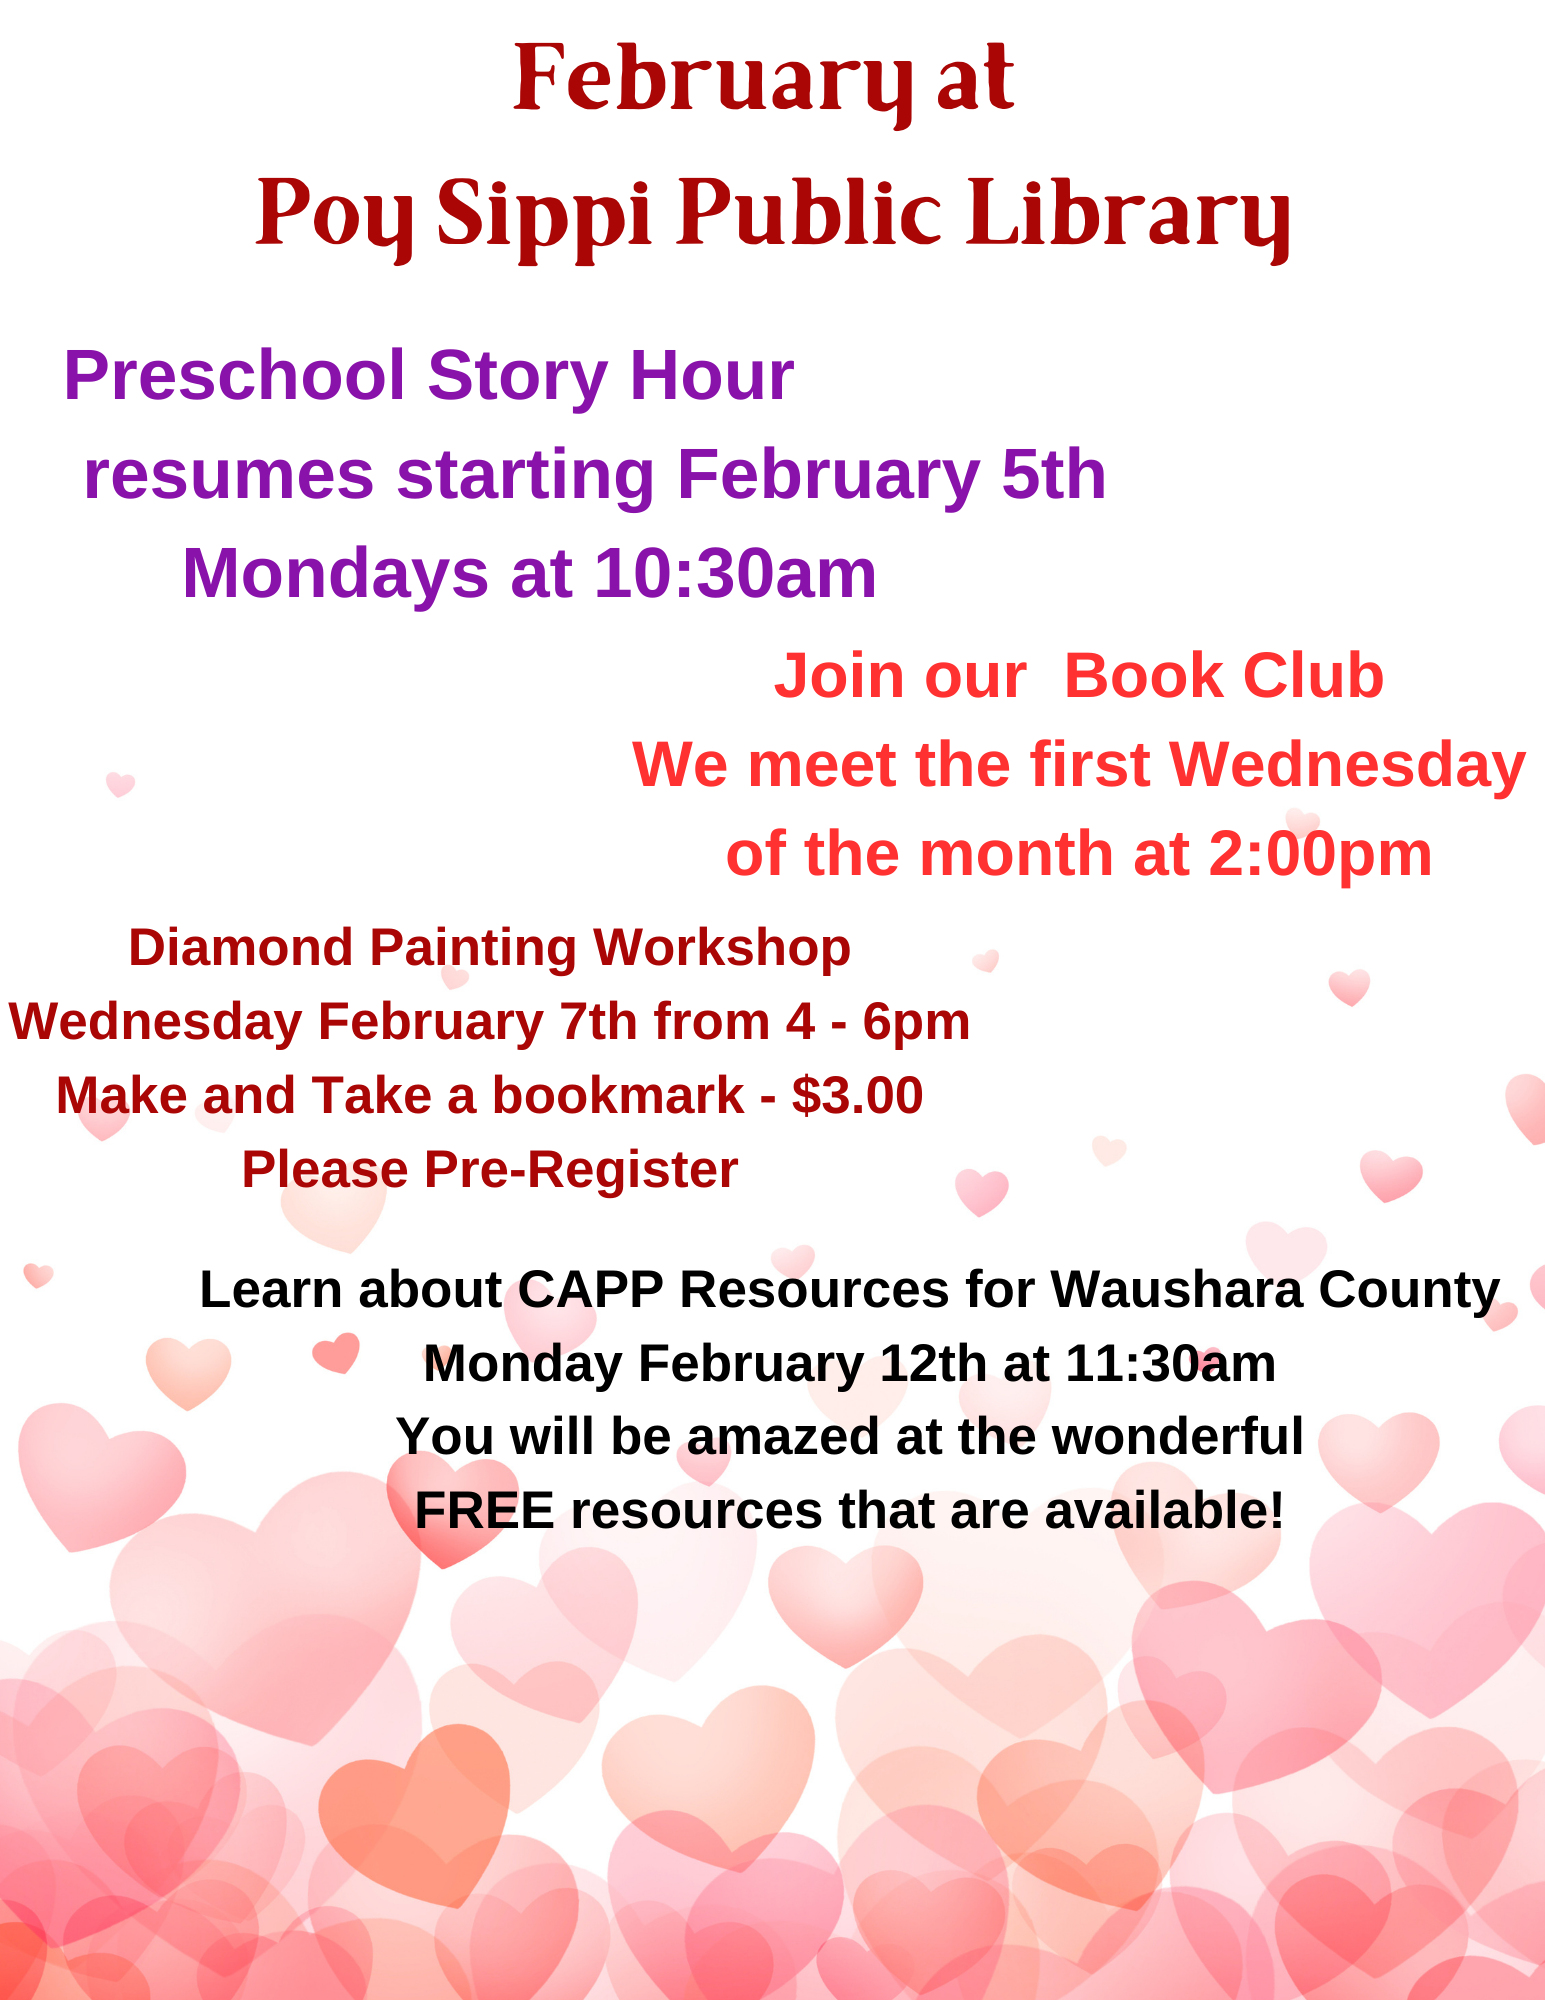 February at Poy Sippi Public Library!